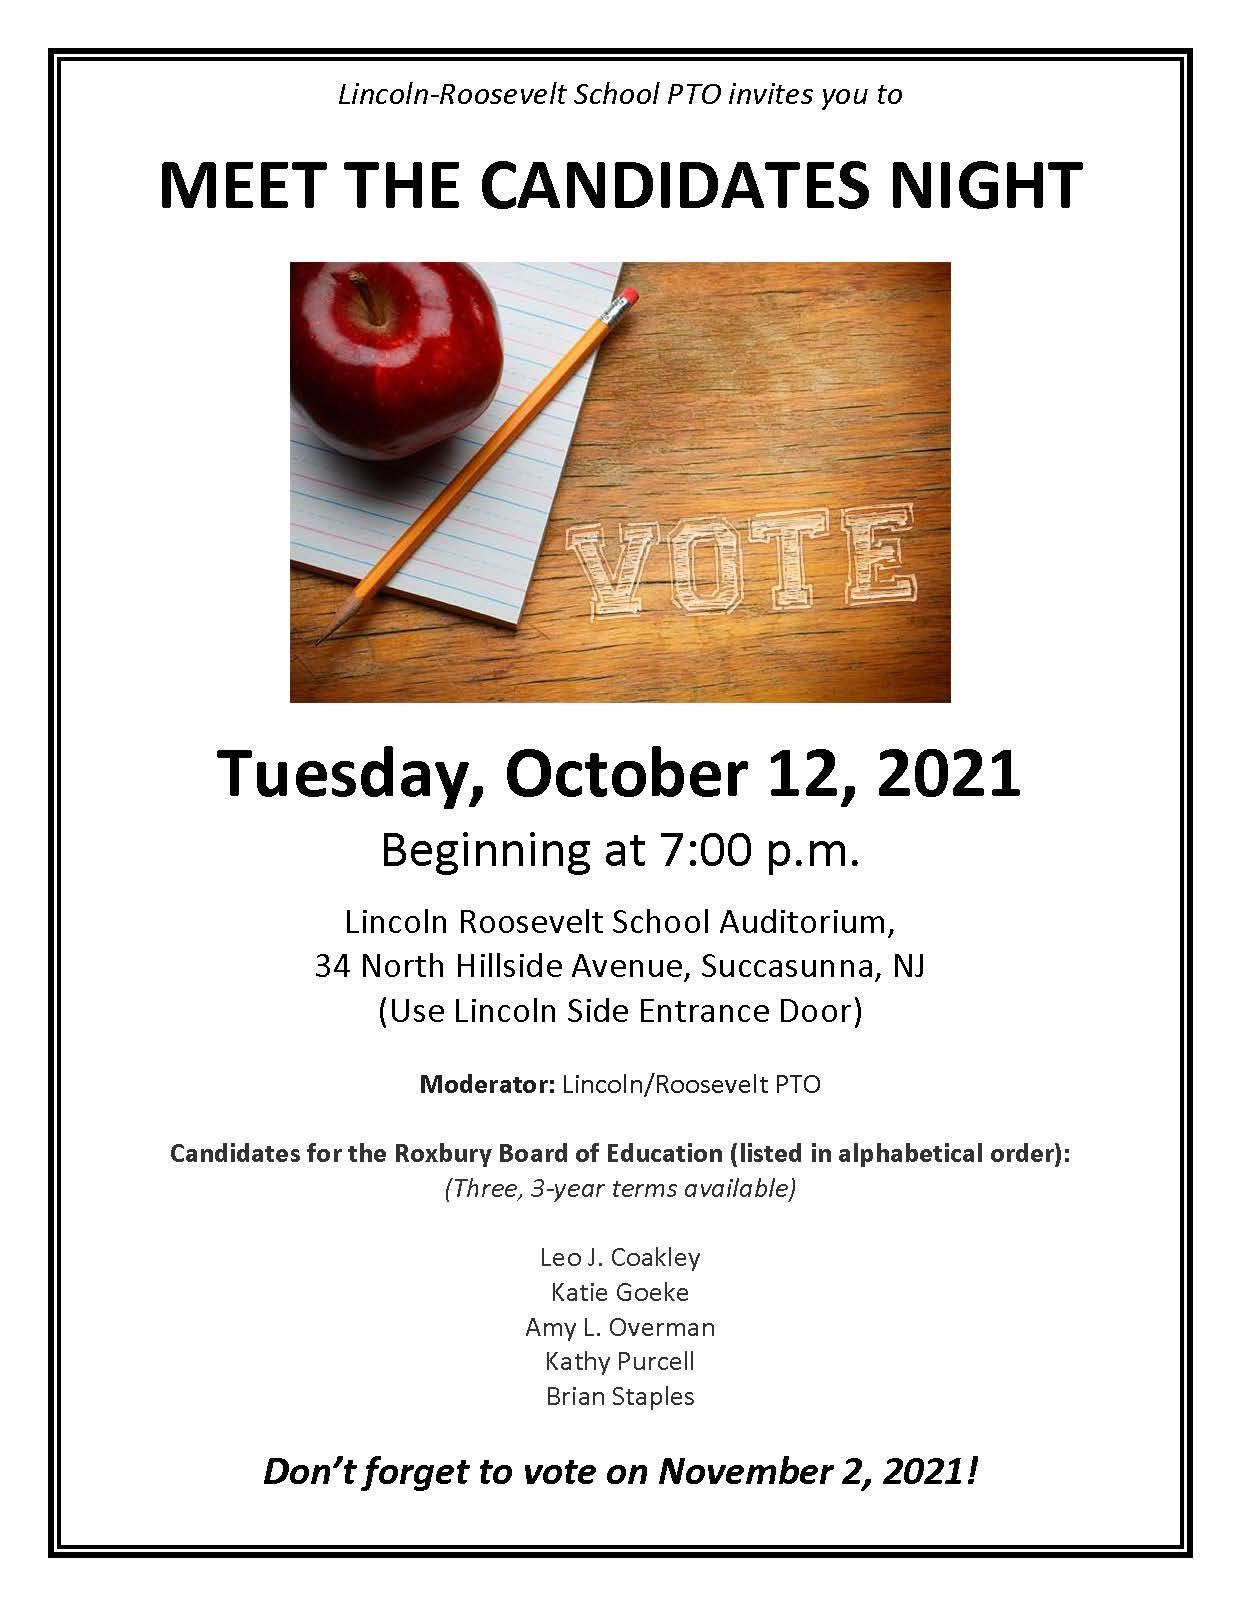  Meet the Candidates Night event flyer